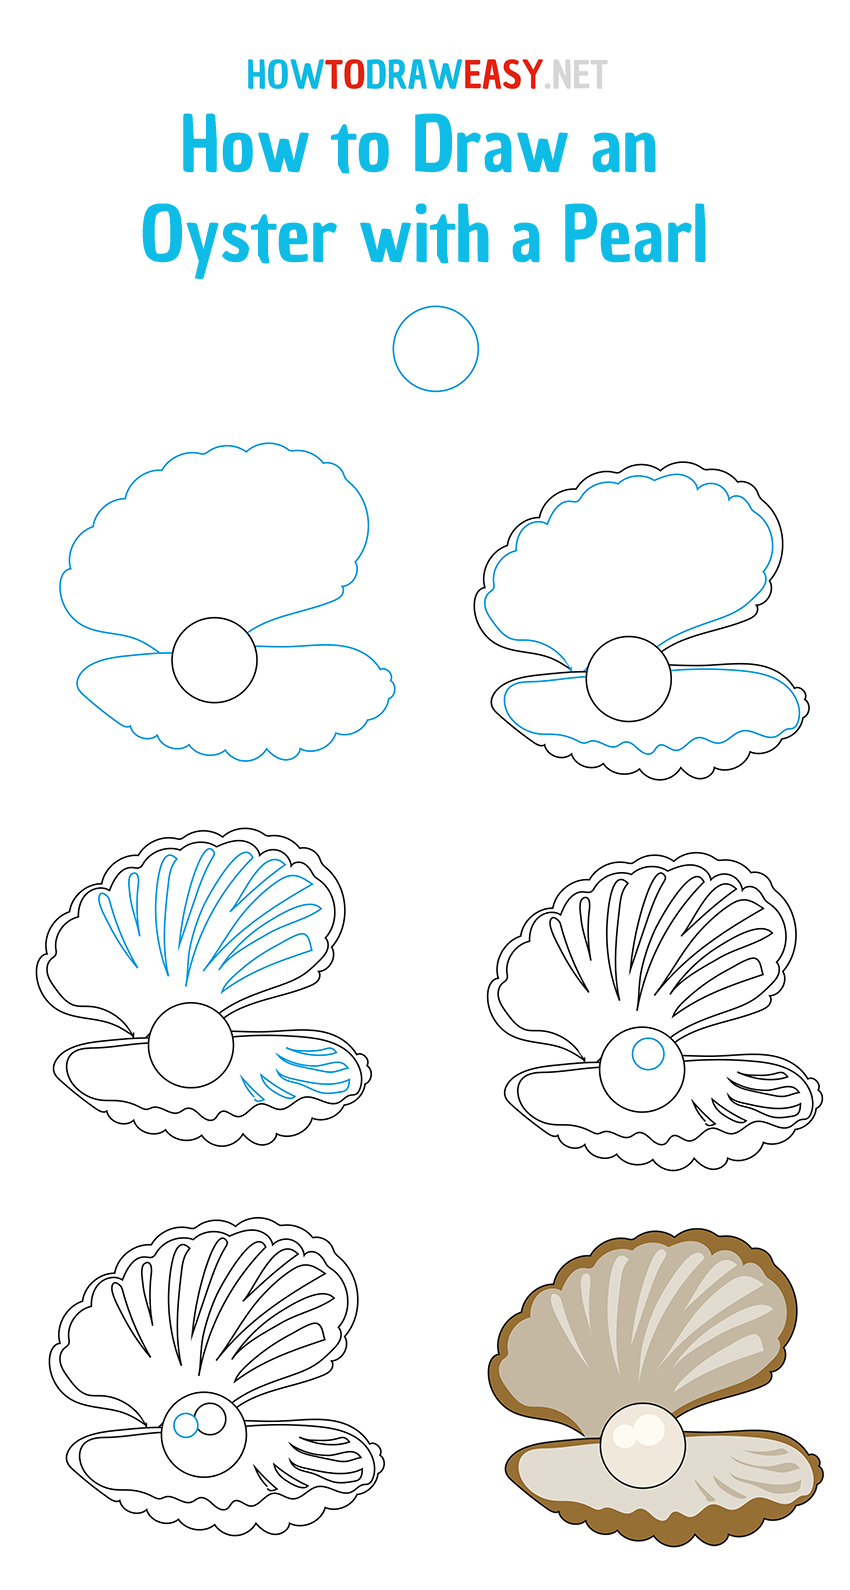 Easy step by step Oyster with a Pearl drawing tutorial